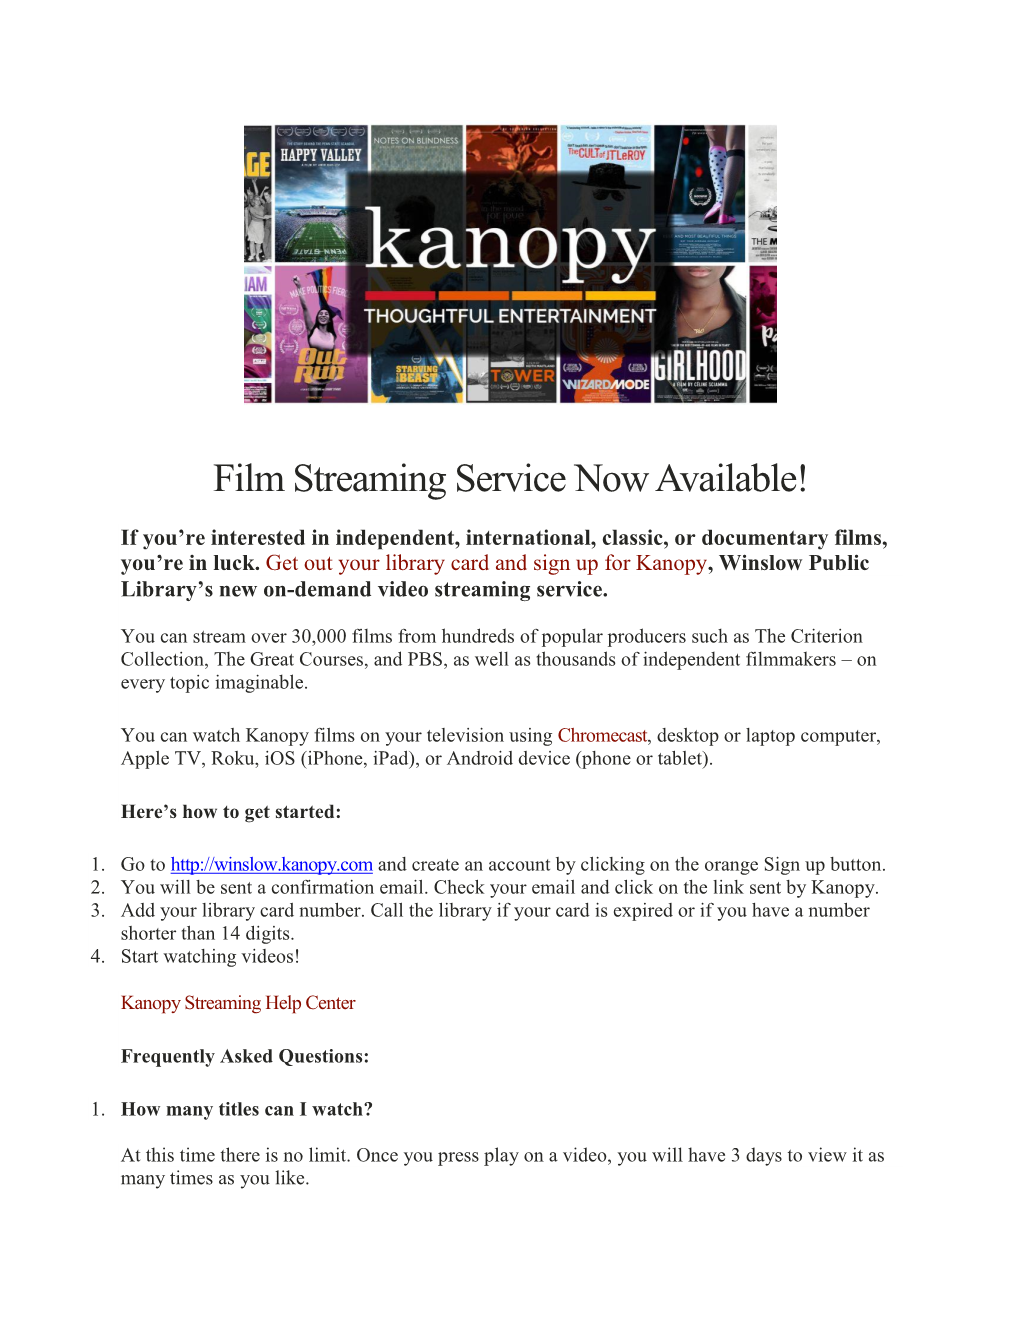 Film Streaming Service Now Available!